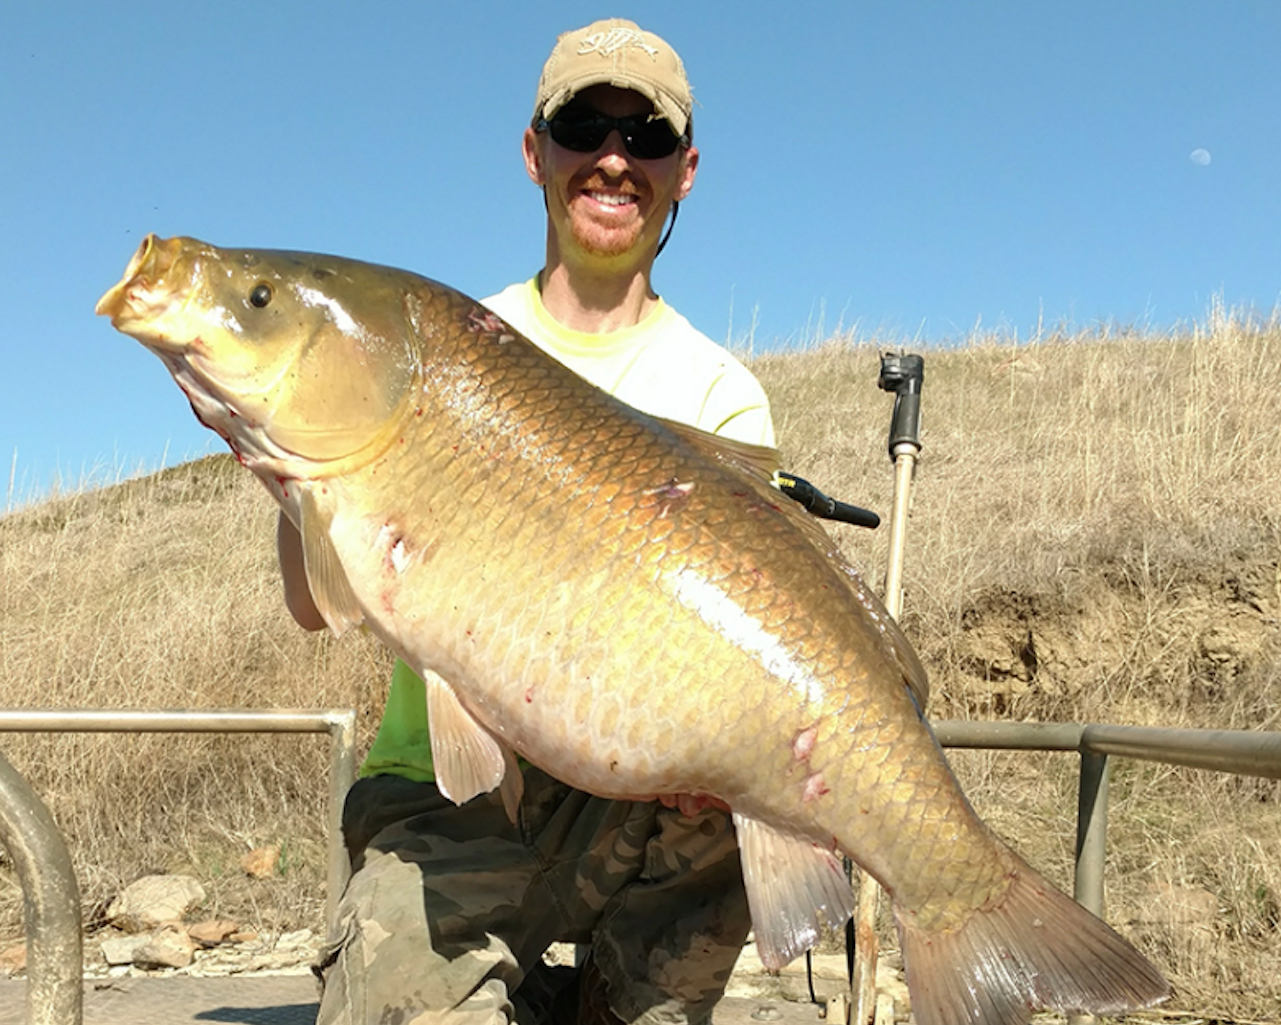 New State Buffalo Record Set by N.D. Bow Fisherman